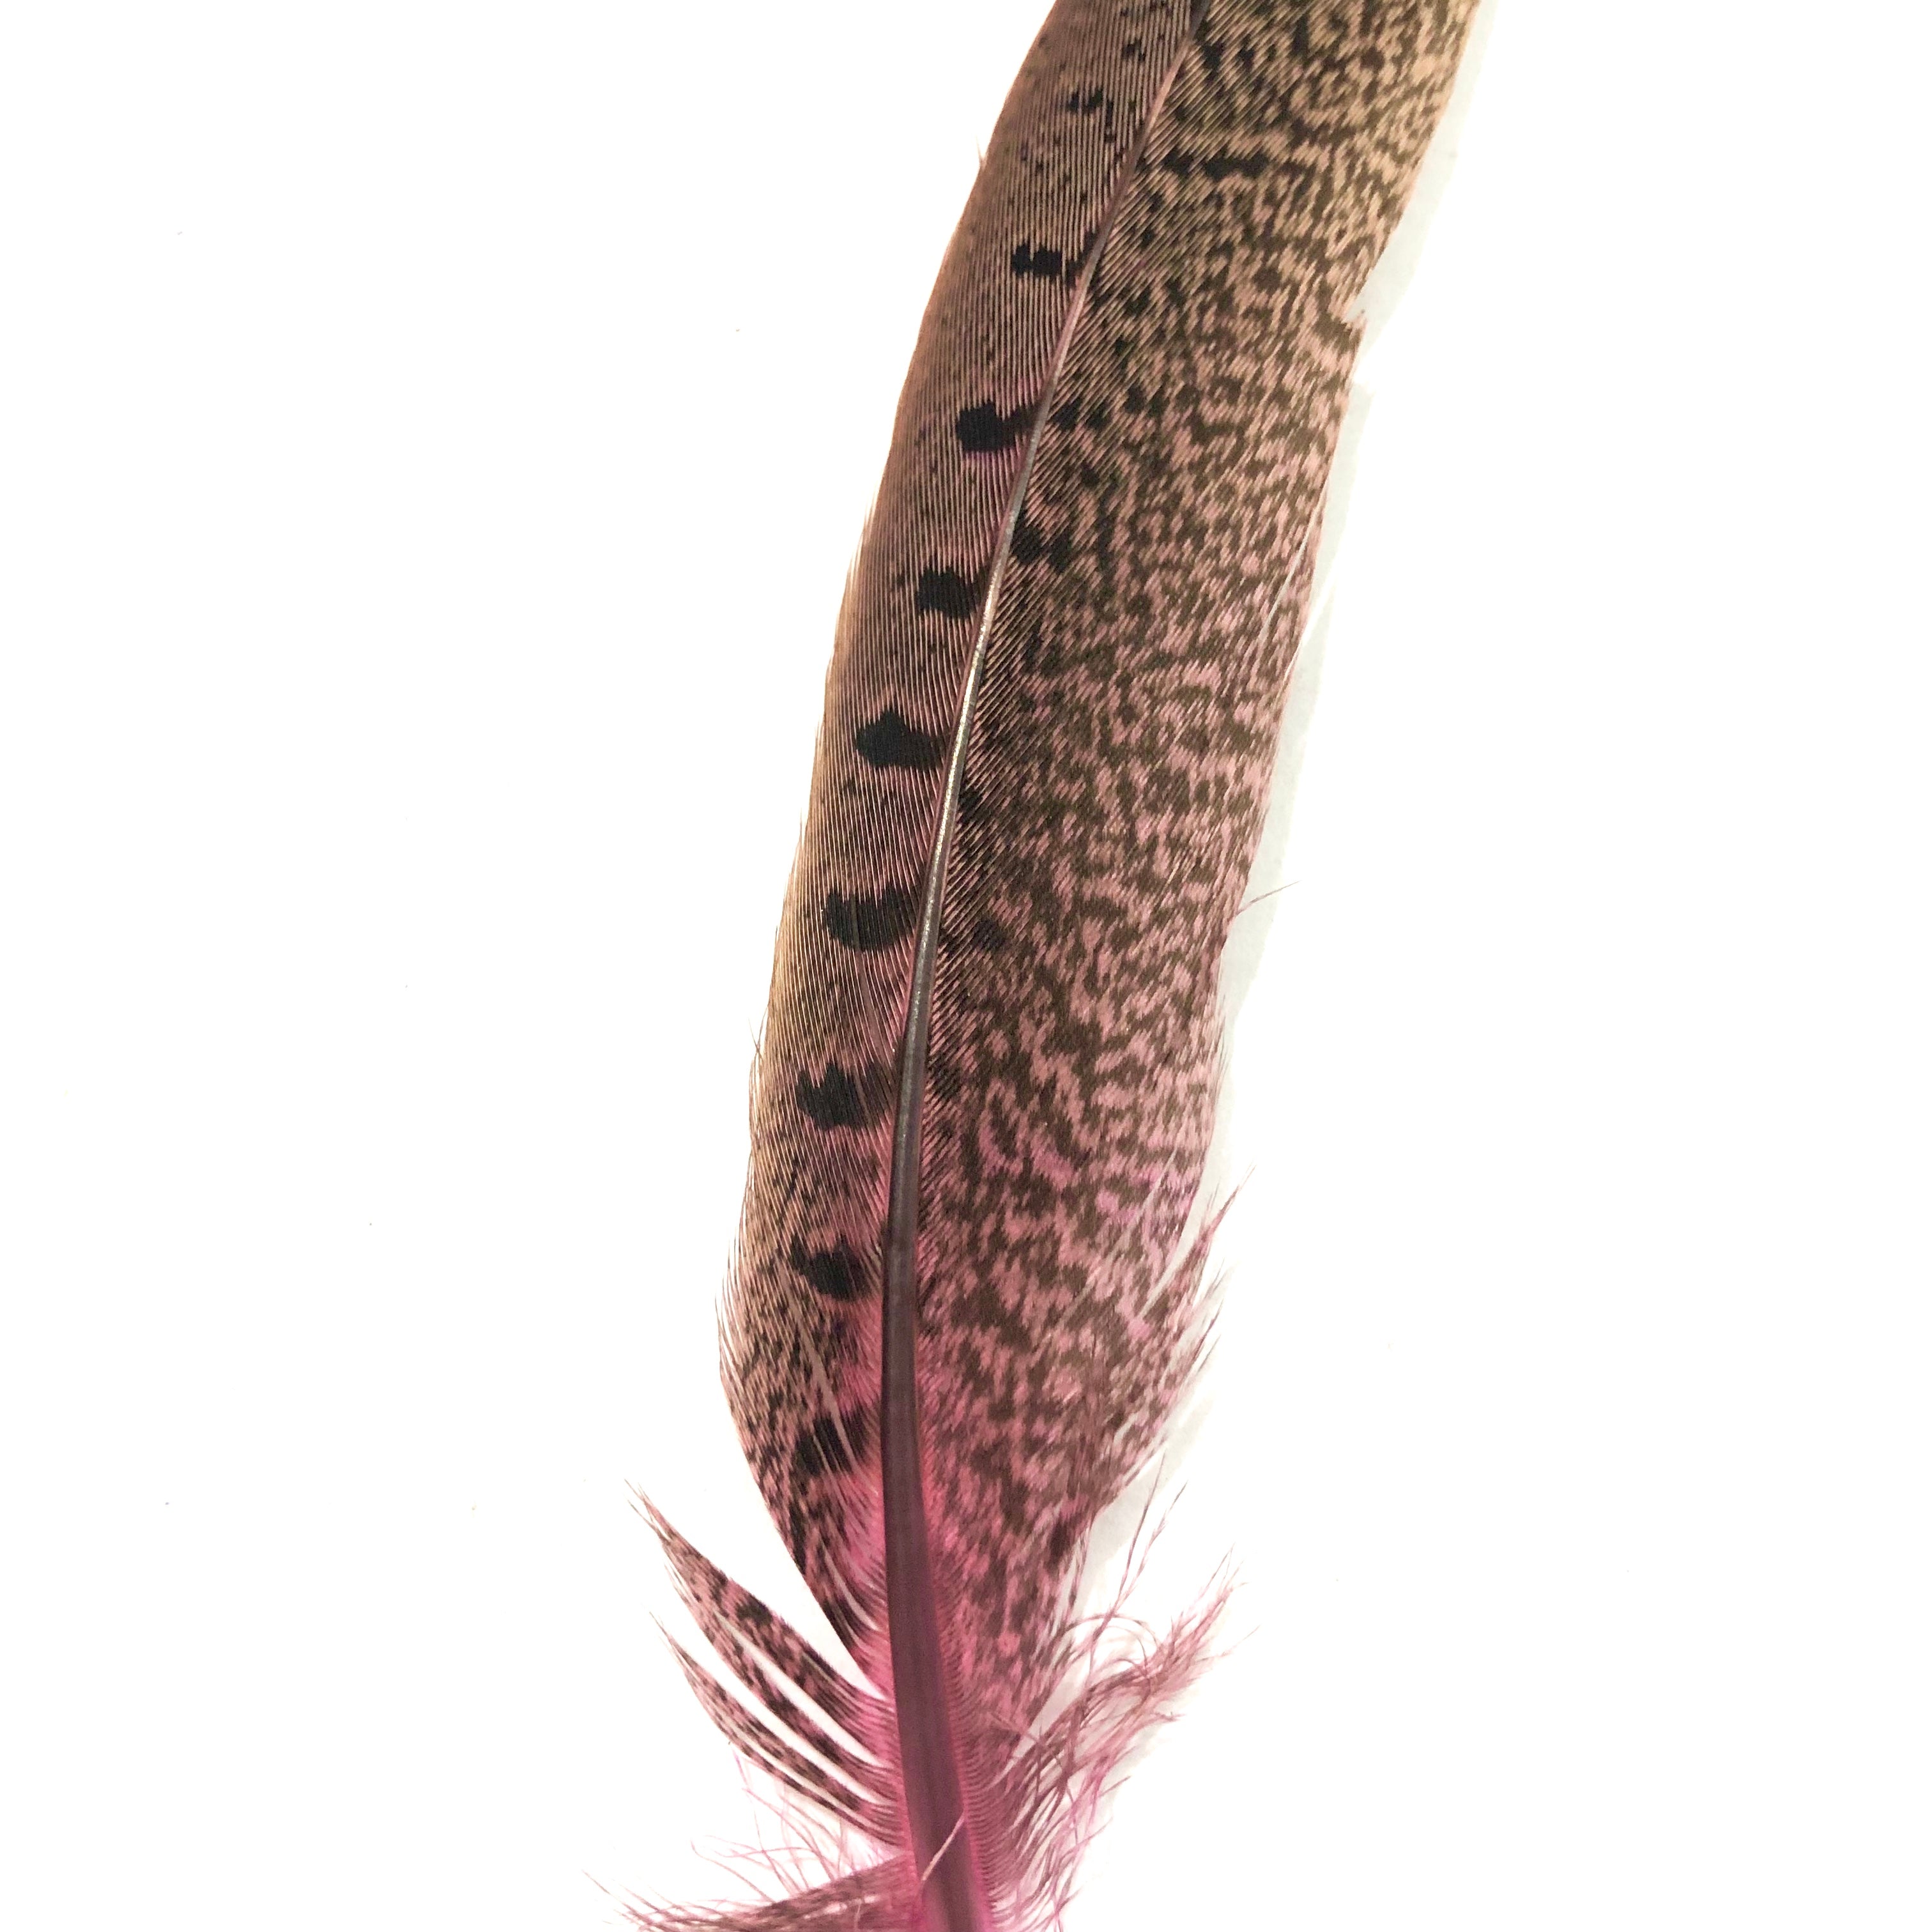 Under 6" Ringneck Pheasant Tail Feather x 10 pcs - Pink